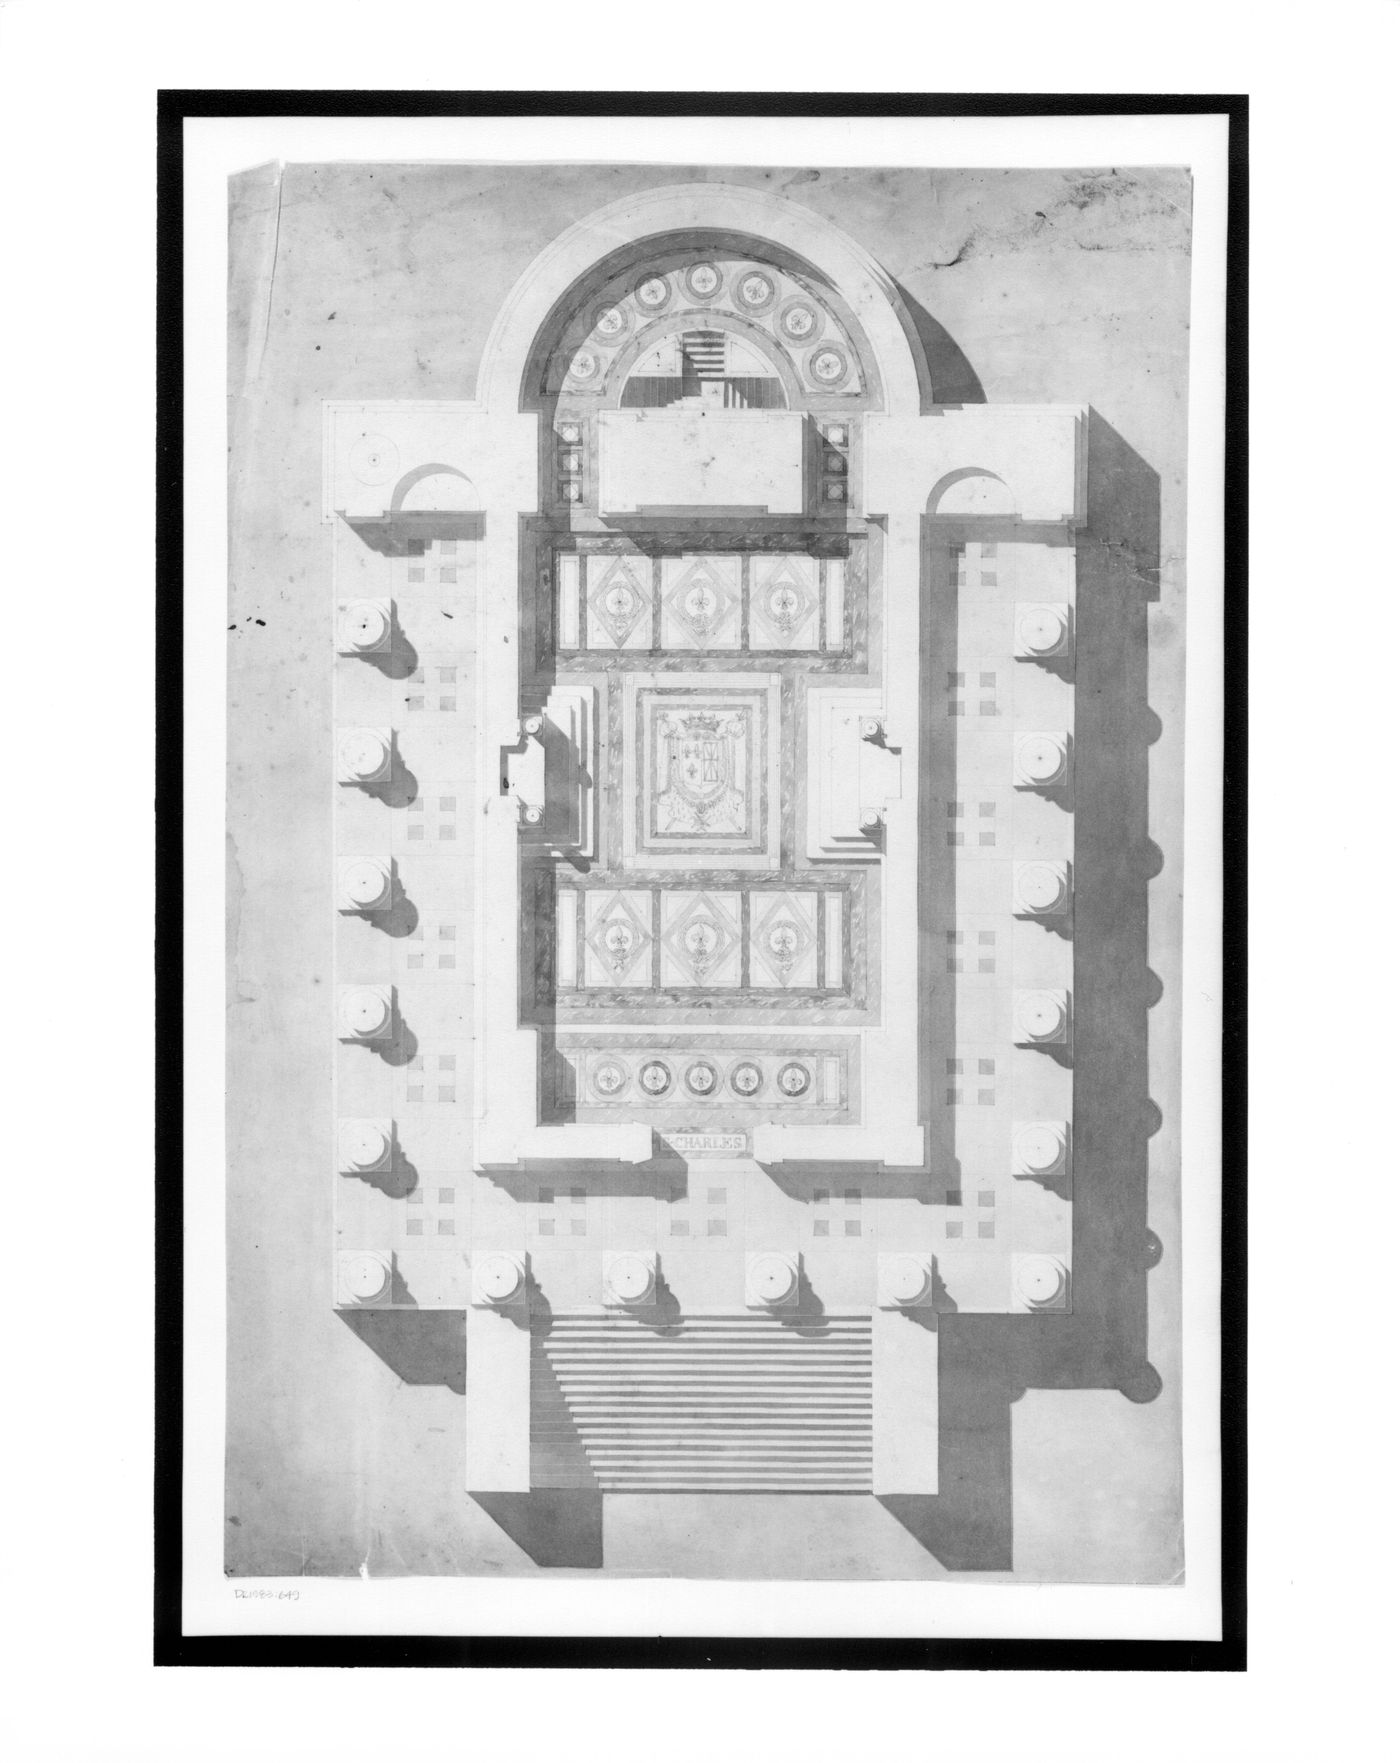 Plan of a Chapel for French Royal family